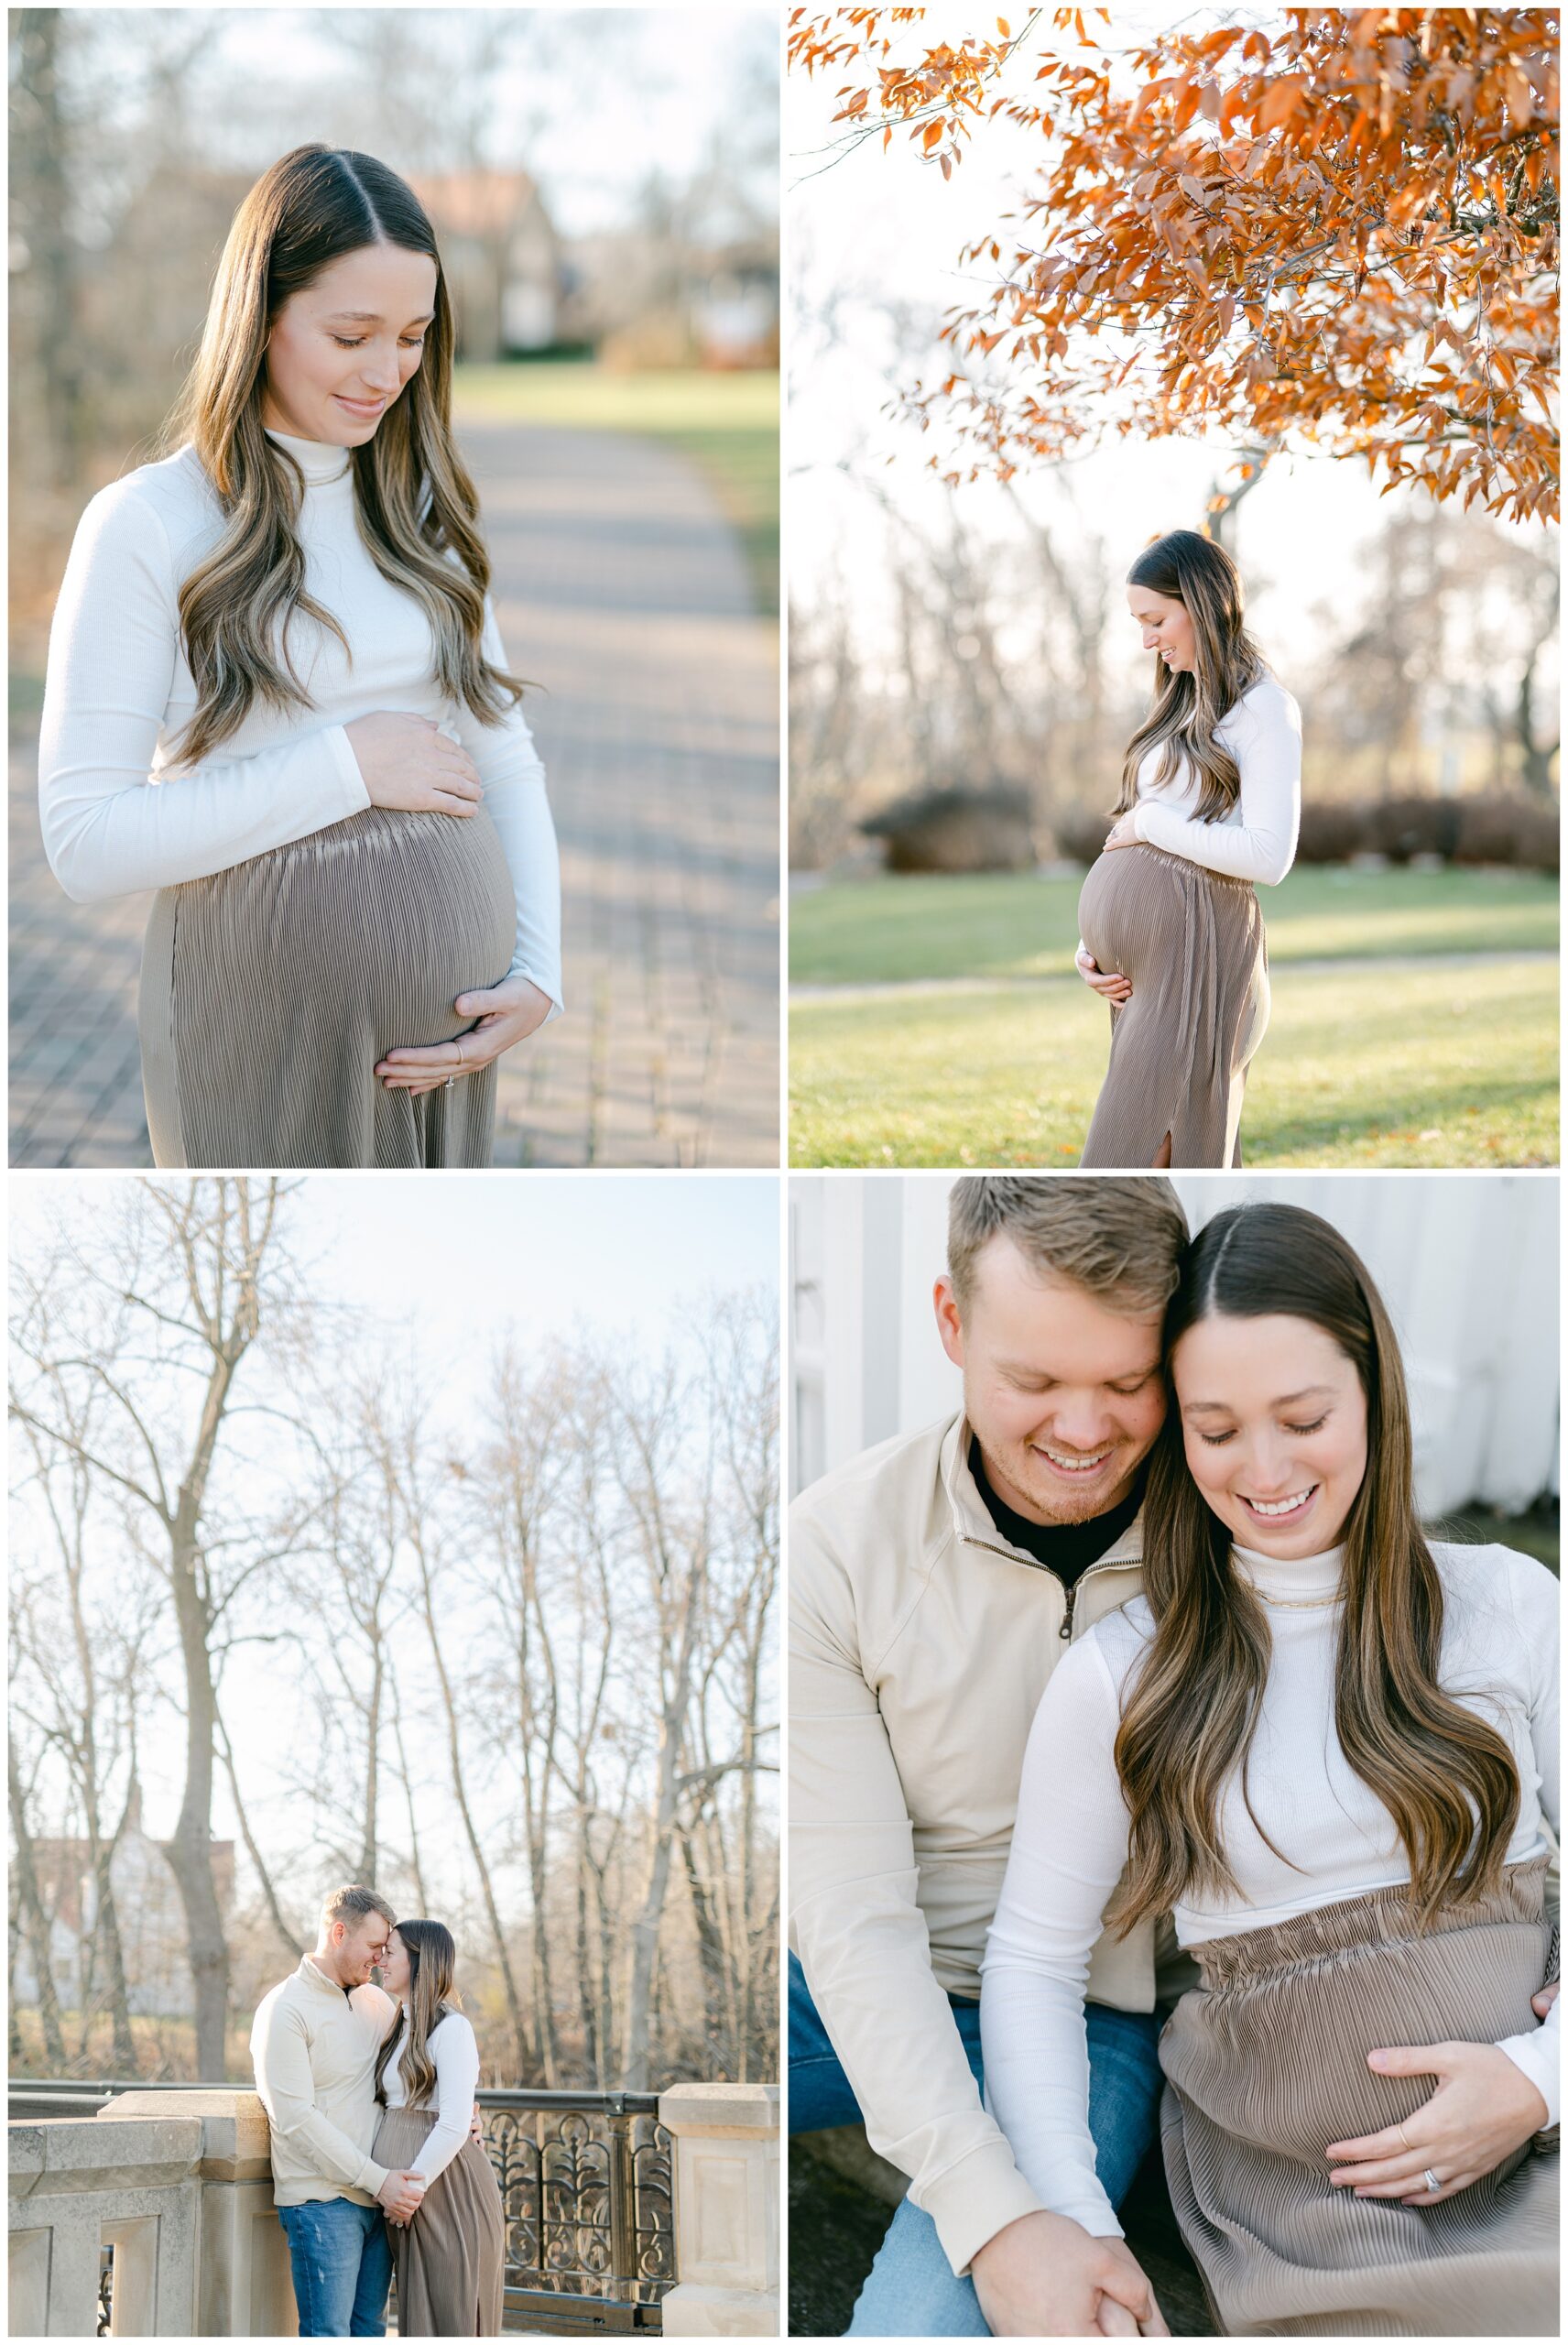 Image collage of a maternity session at Lake Park in Milwaukee, one of my favorite Milwaukee photo locations.